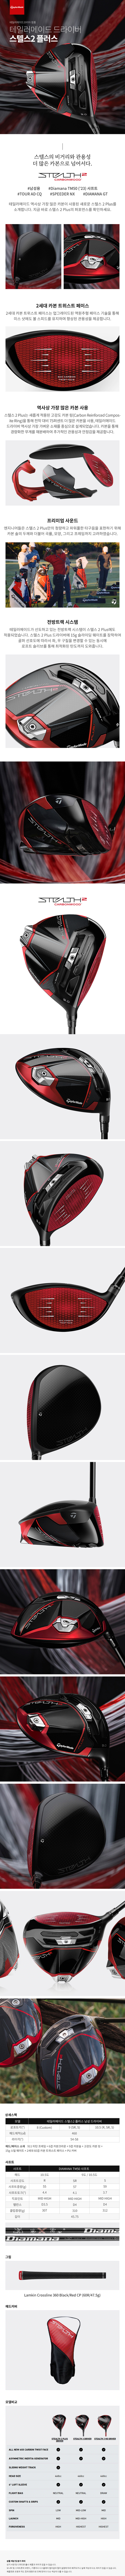 taylormade_stelth2_plus_driver_23.jpg